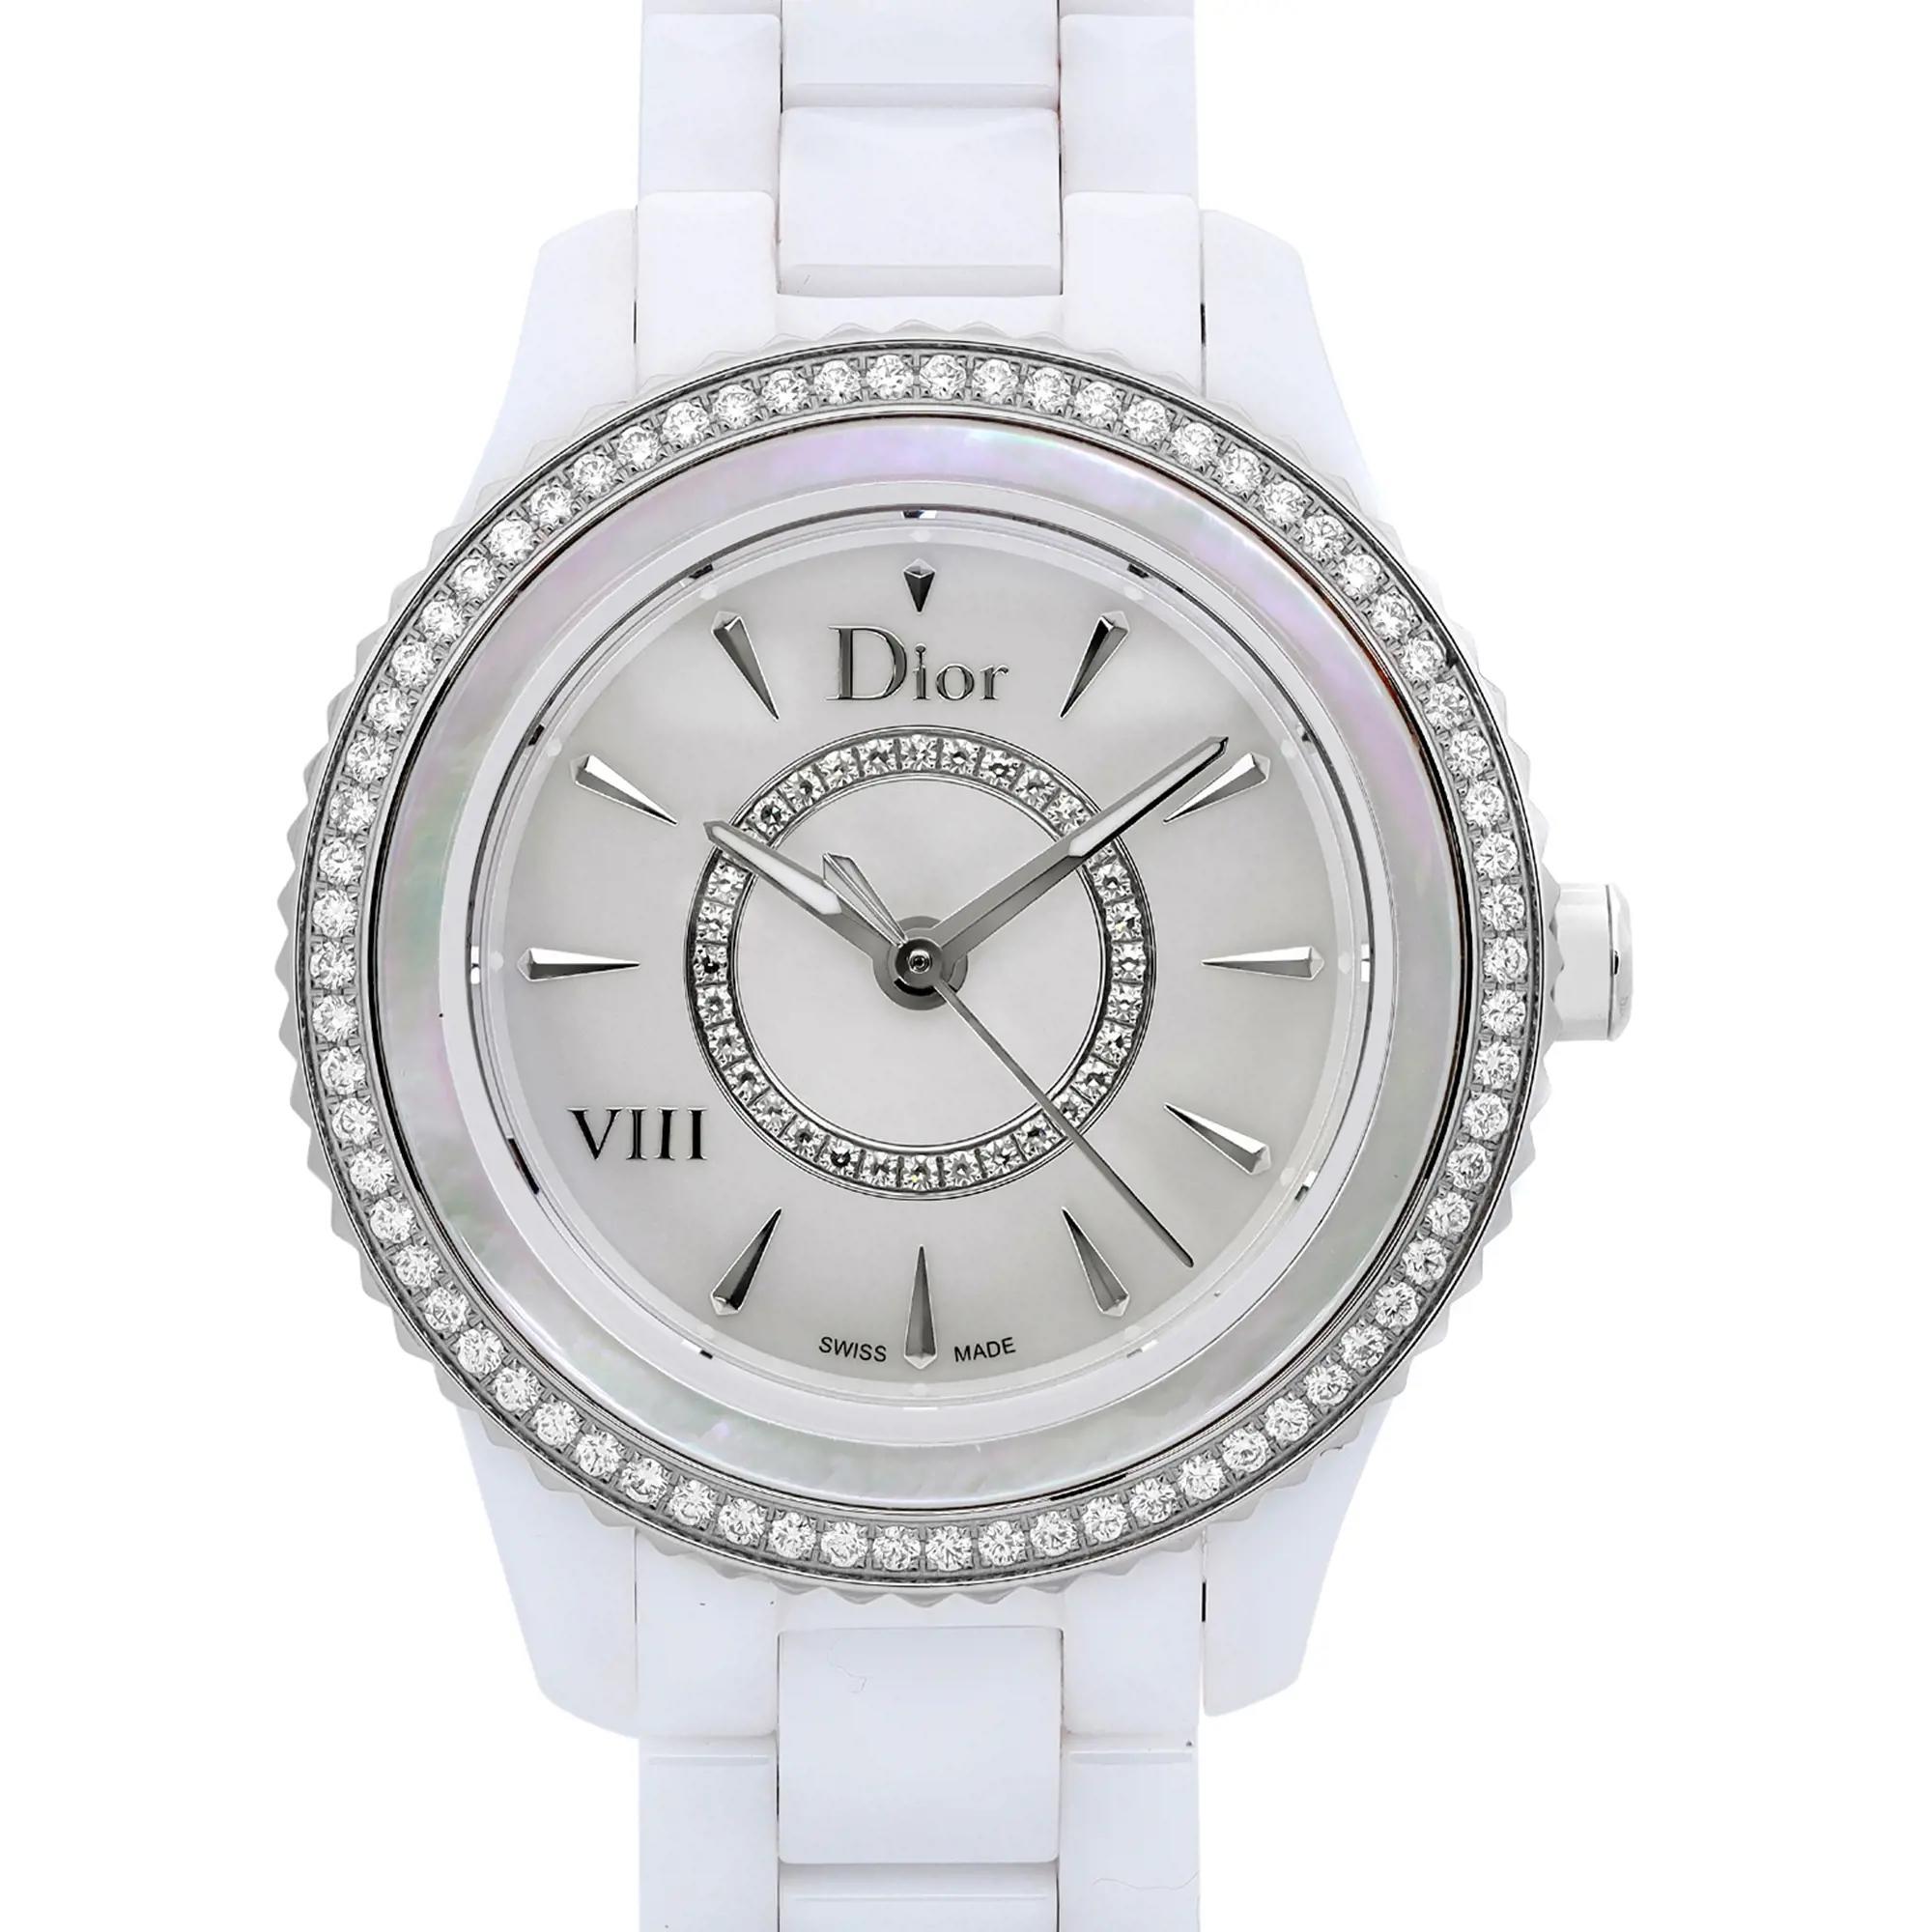 Wrist fit 6.25 Inches. The original box and papers are not included. Comes with a presentation box and an authenticity card. Covered by a 1-year seller's warranty. 

Brand: Dior  Type: Wristwatch  Department: Women  Model Number: CD1231E4C001 